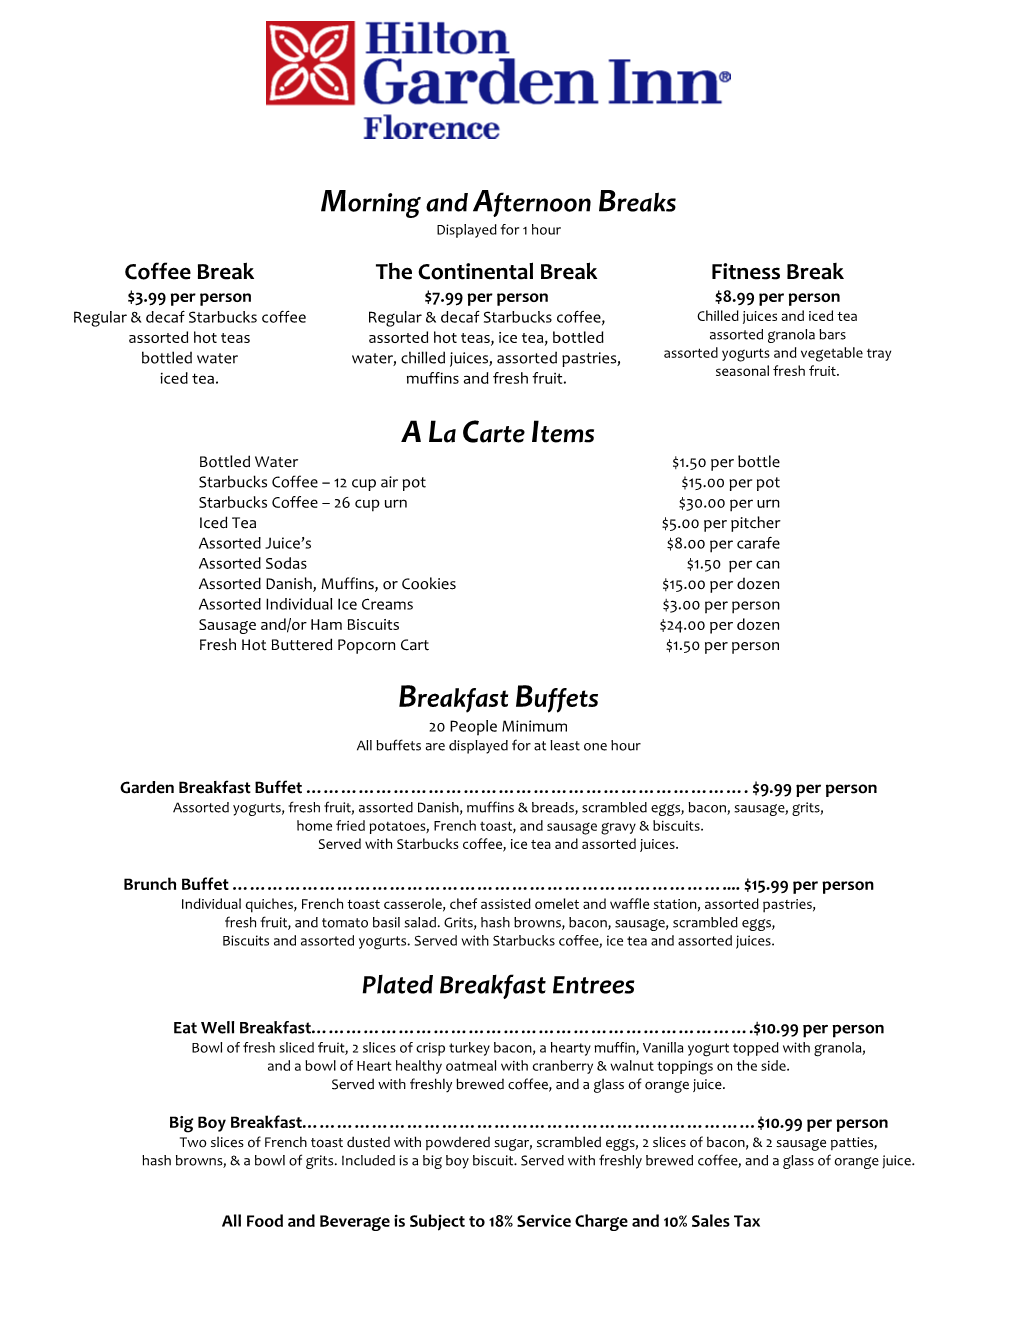 Morning and Afternoon Breaks Ala Carte Items Breakfast Buffets Plated